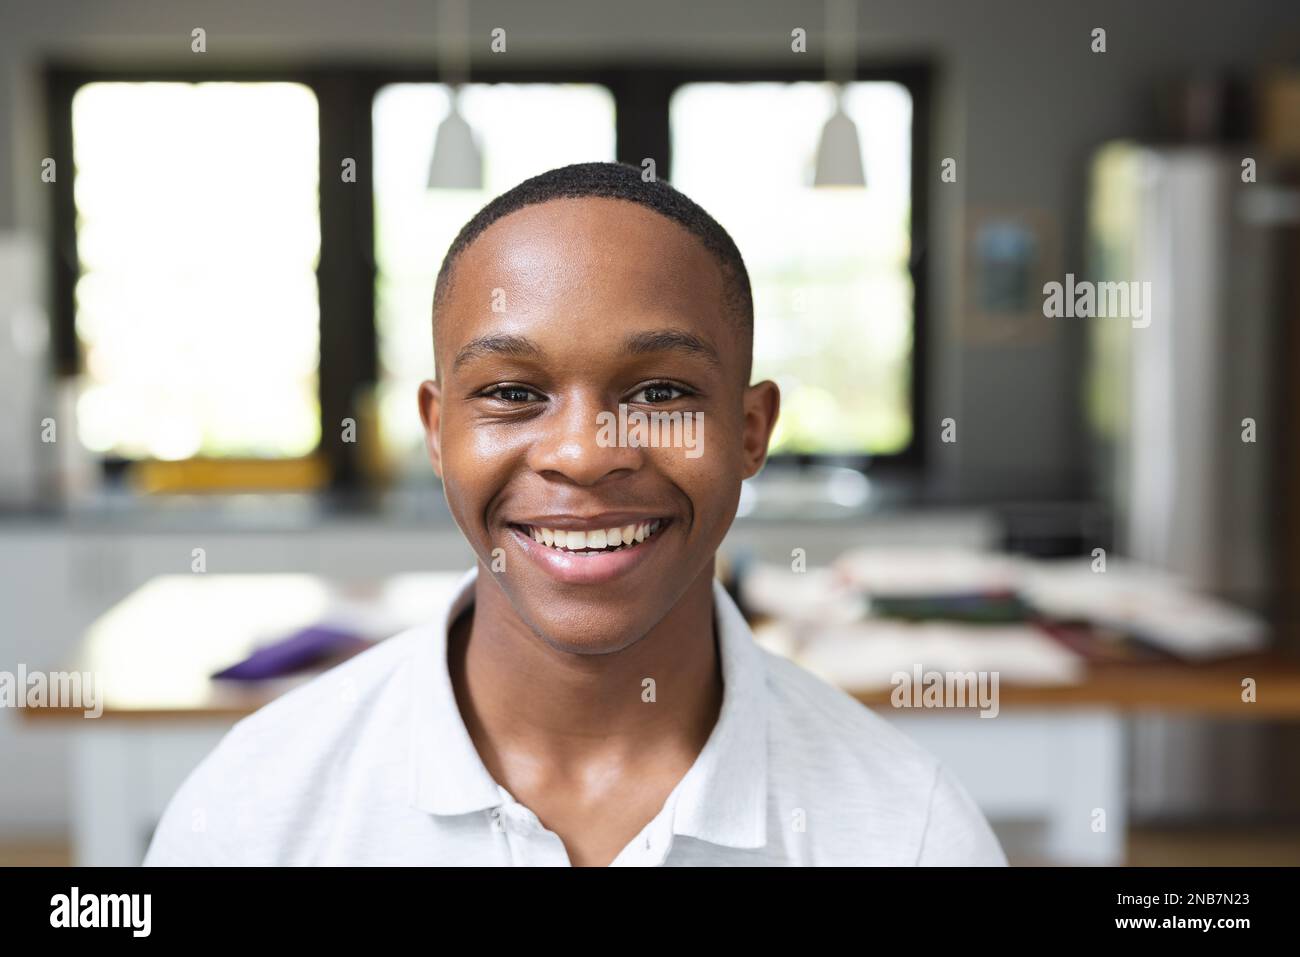 Image of happy african american teenage boy looking at camera. Teenagers, adolescence and lifestyle concept. Stock Photo